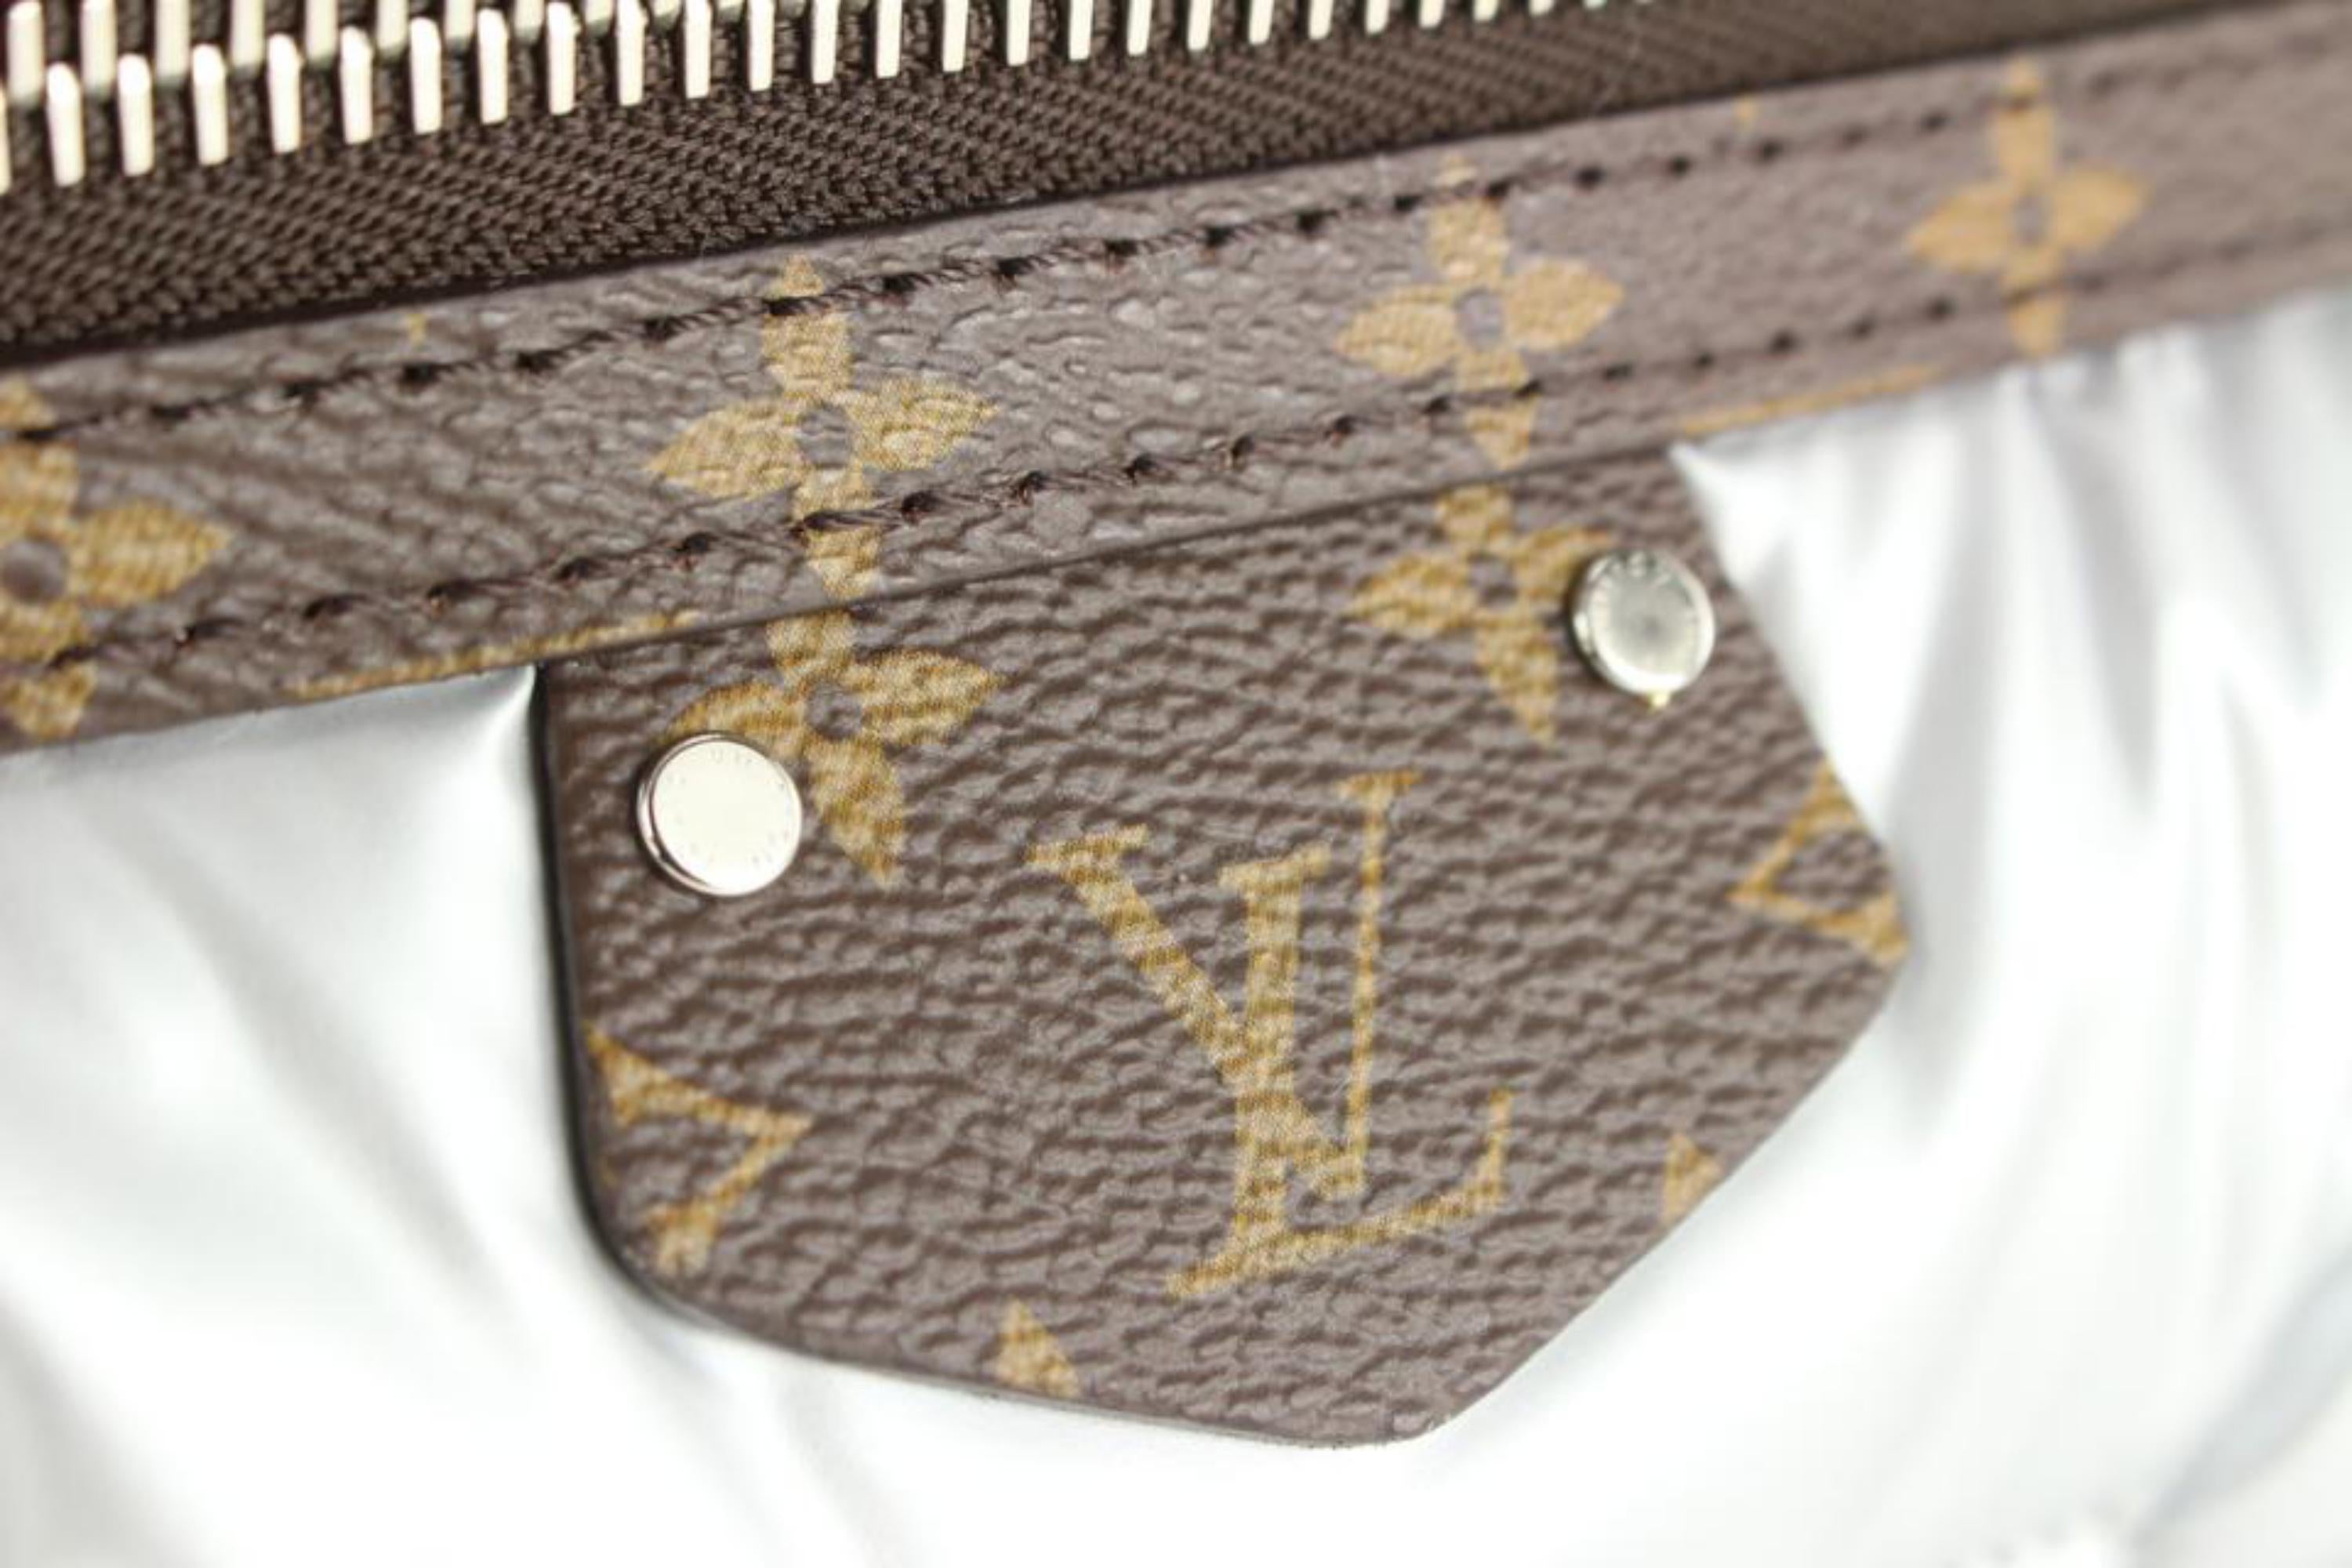 Buy Louis Vuitton LV Bum Bag Dupe CL023 here and Save Money